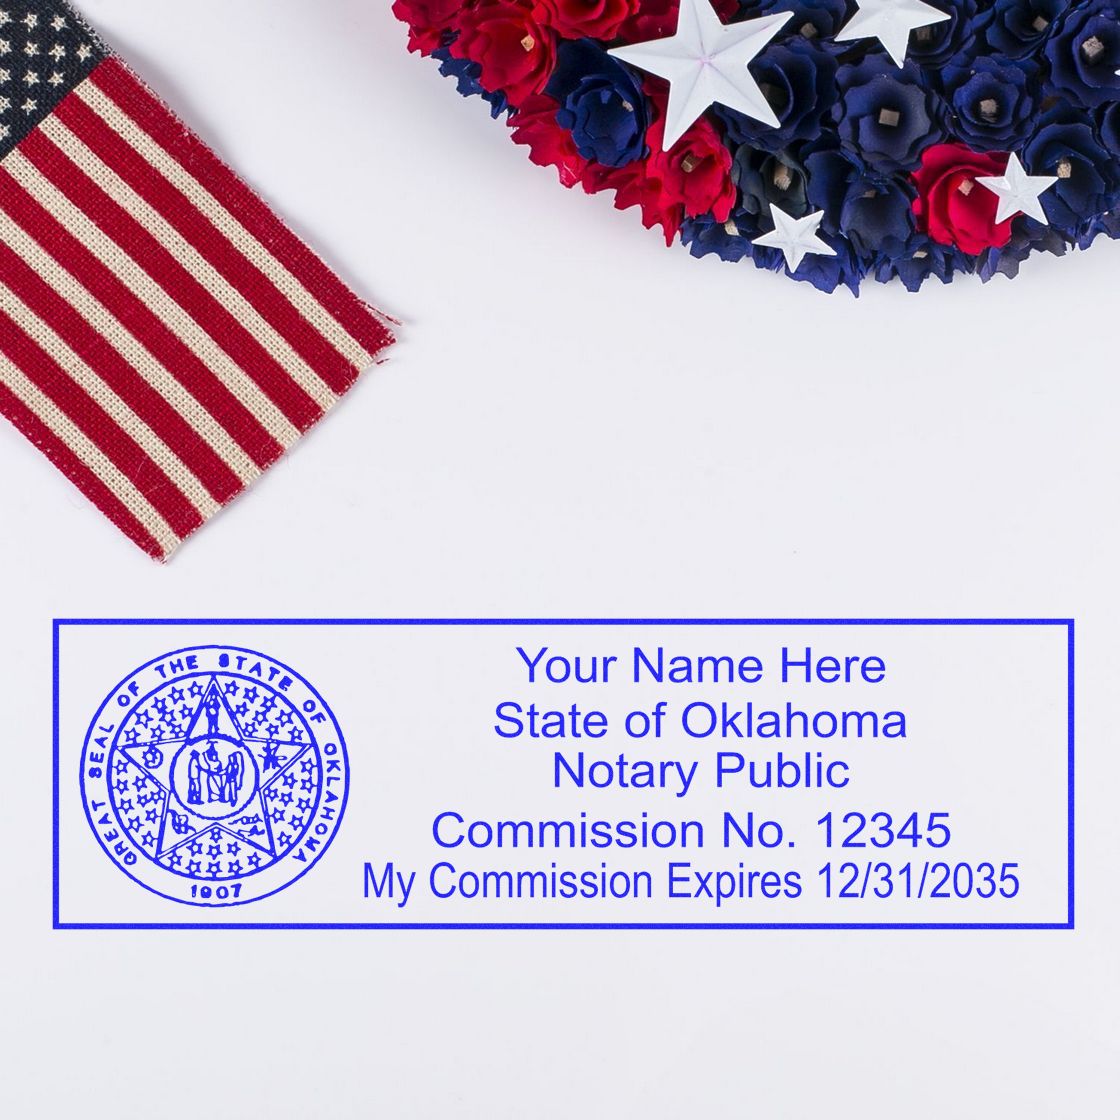 This paper is stamped with a sample imprint of the Wooden Handle Oklahoma State Seal Notary Public Stamp, signifying its quality and reliability.